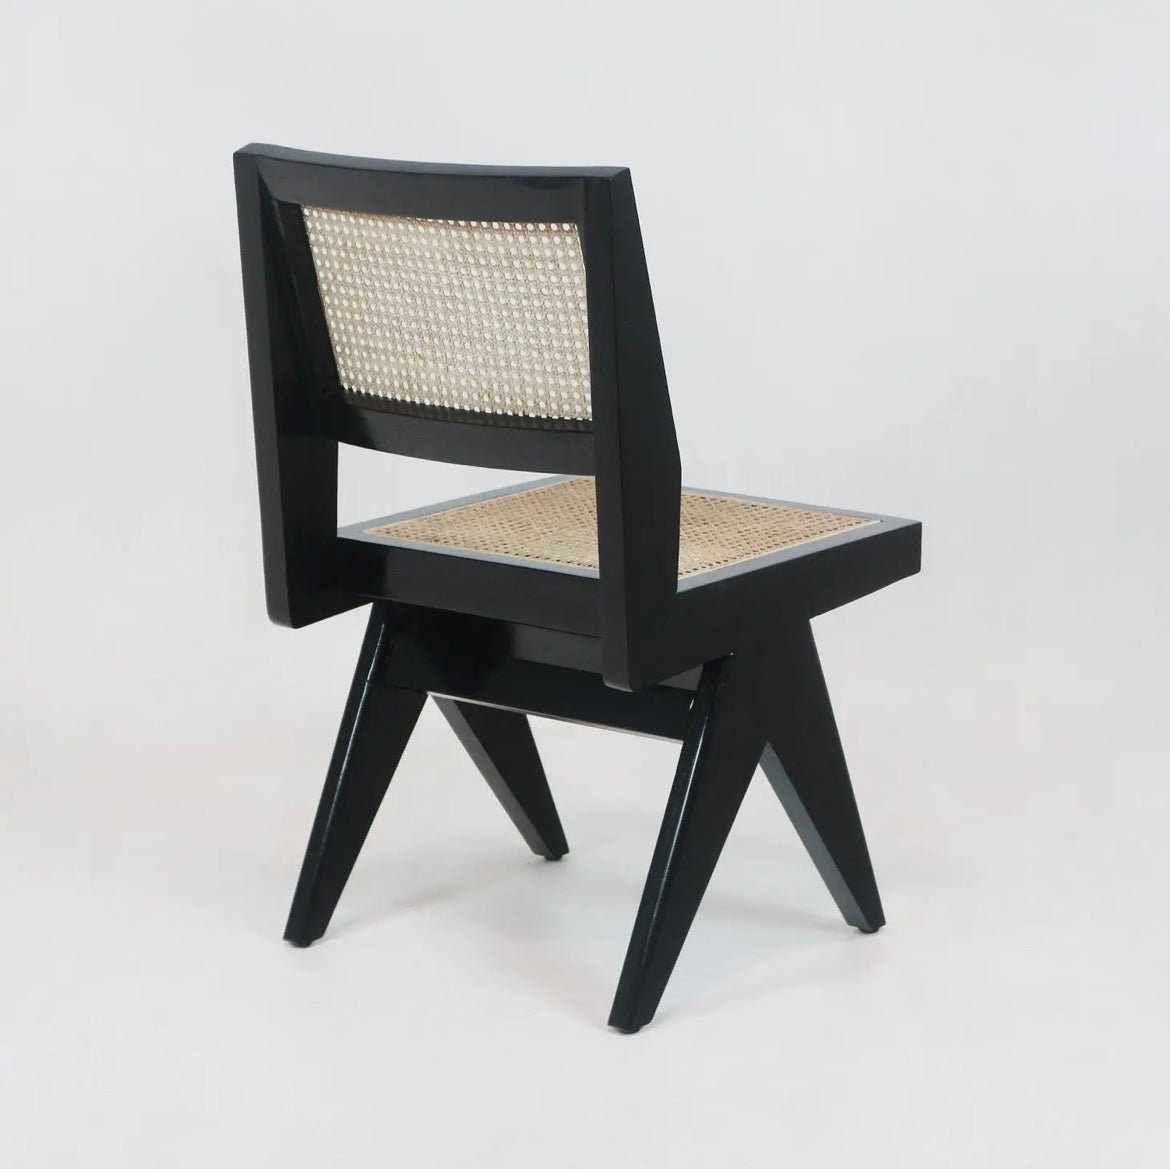 ‘Jeanneret’ Armless Side Chair - EcoLuxe Furnishings